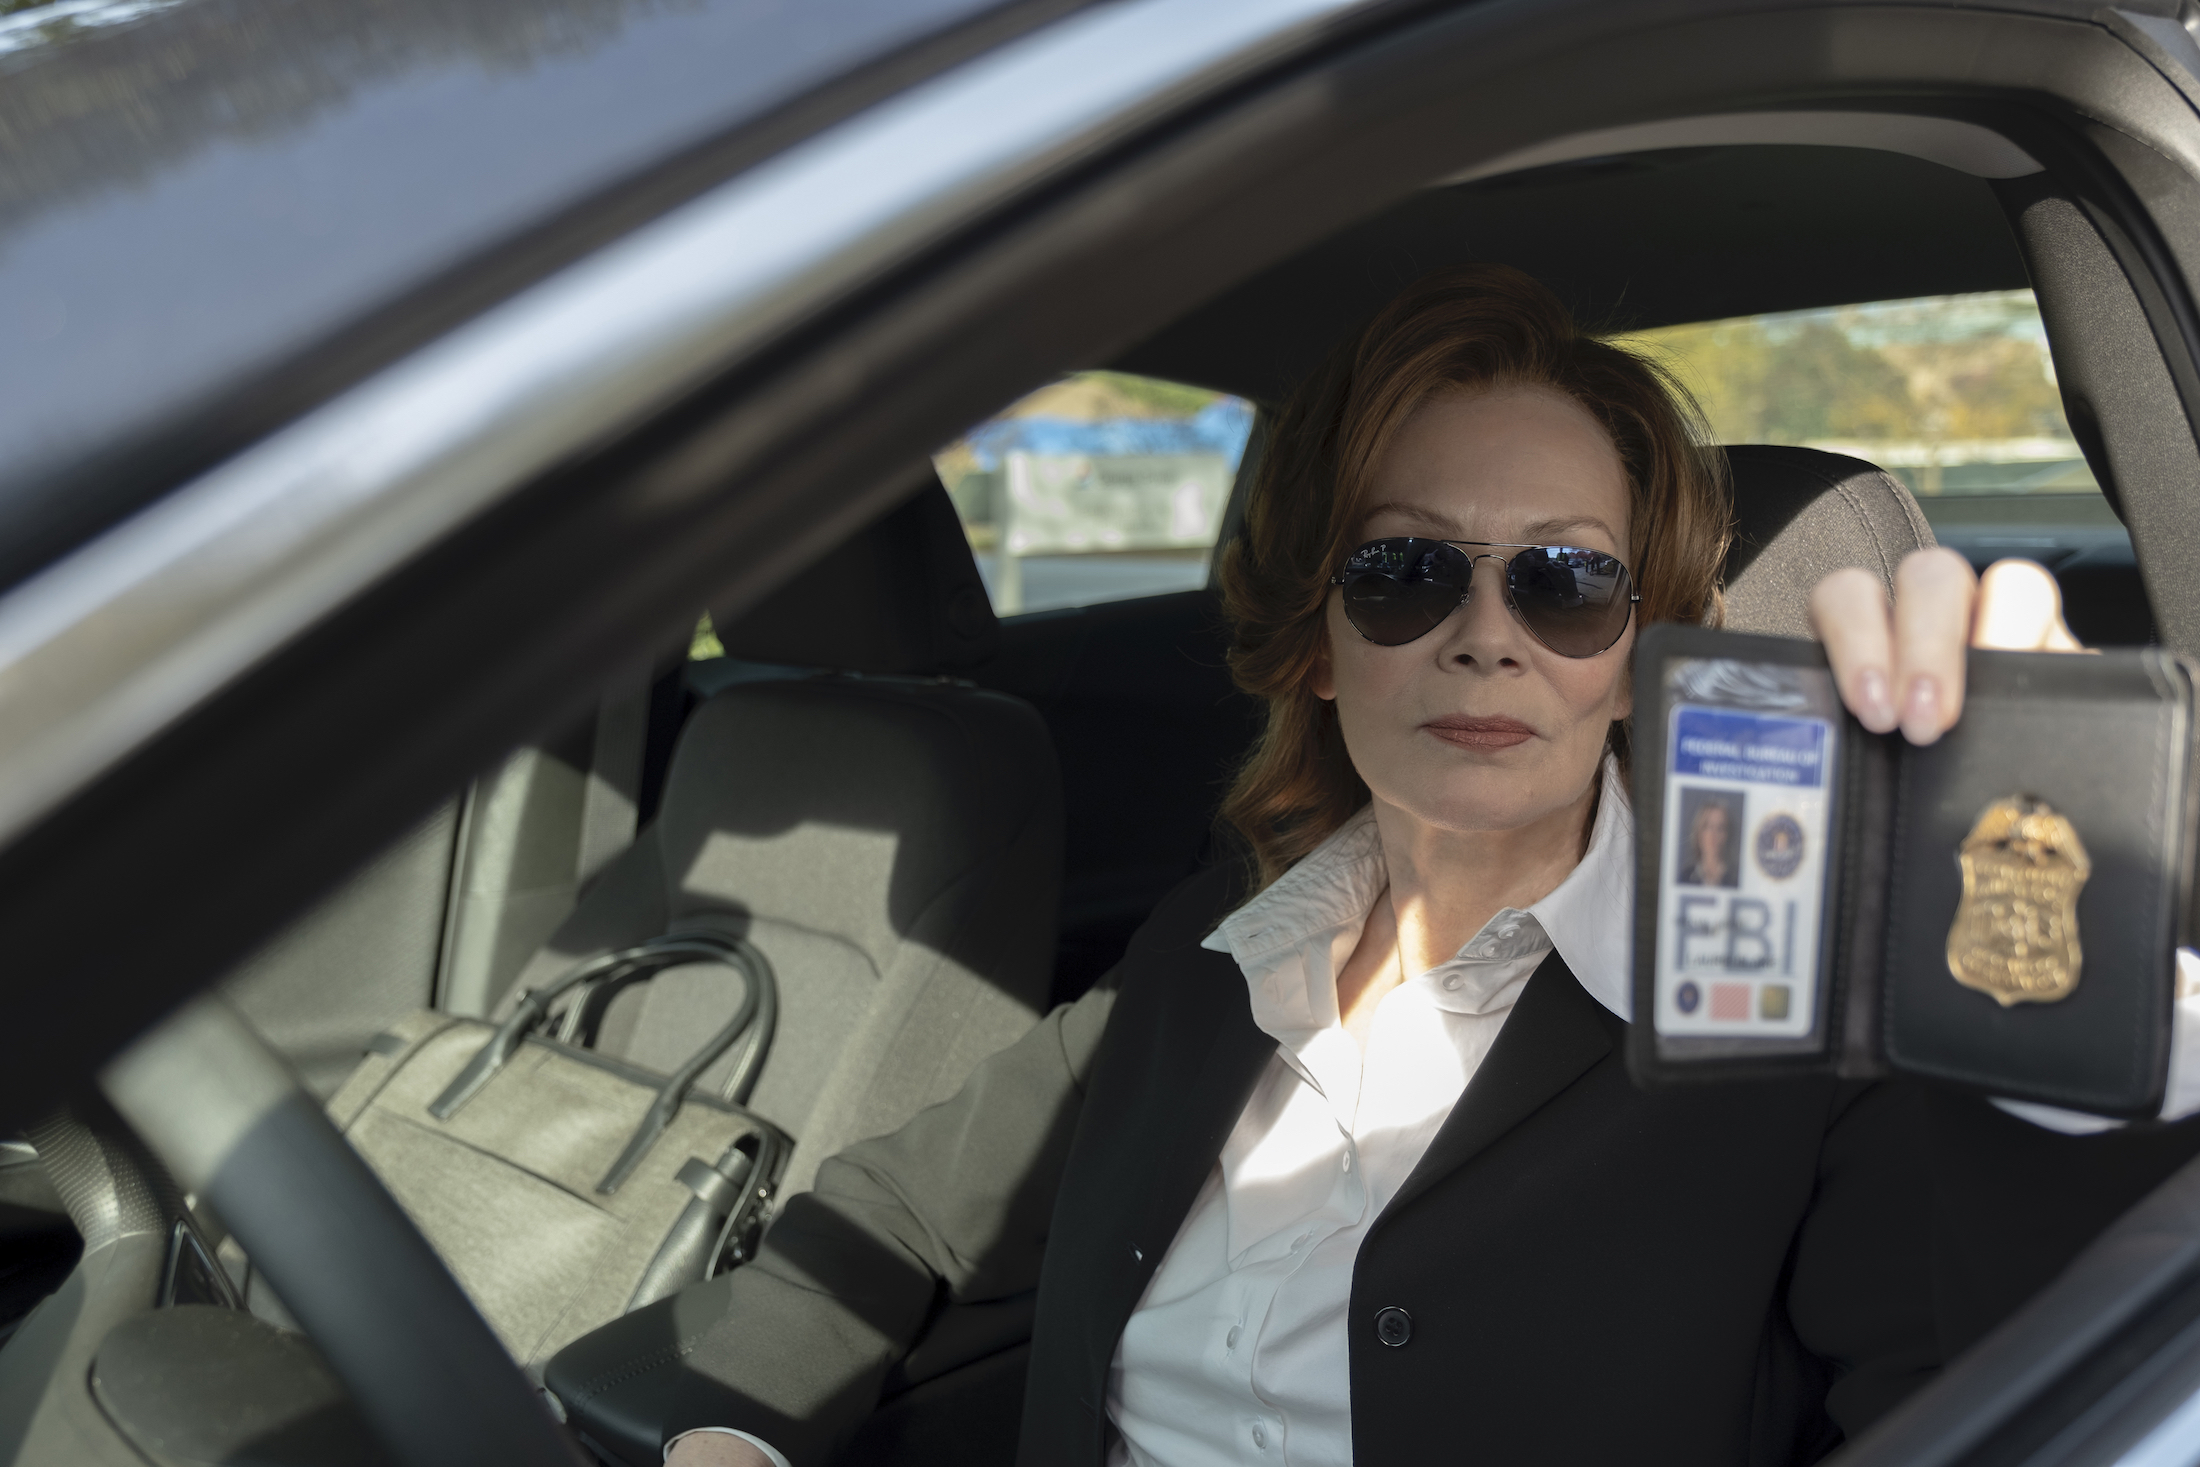 laurie (jean smart) rides up to the graveyard in shades and flashes her FBI badge